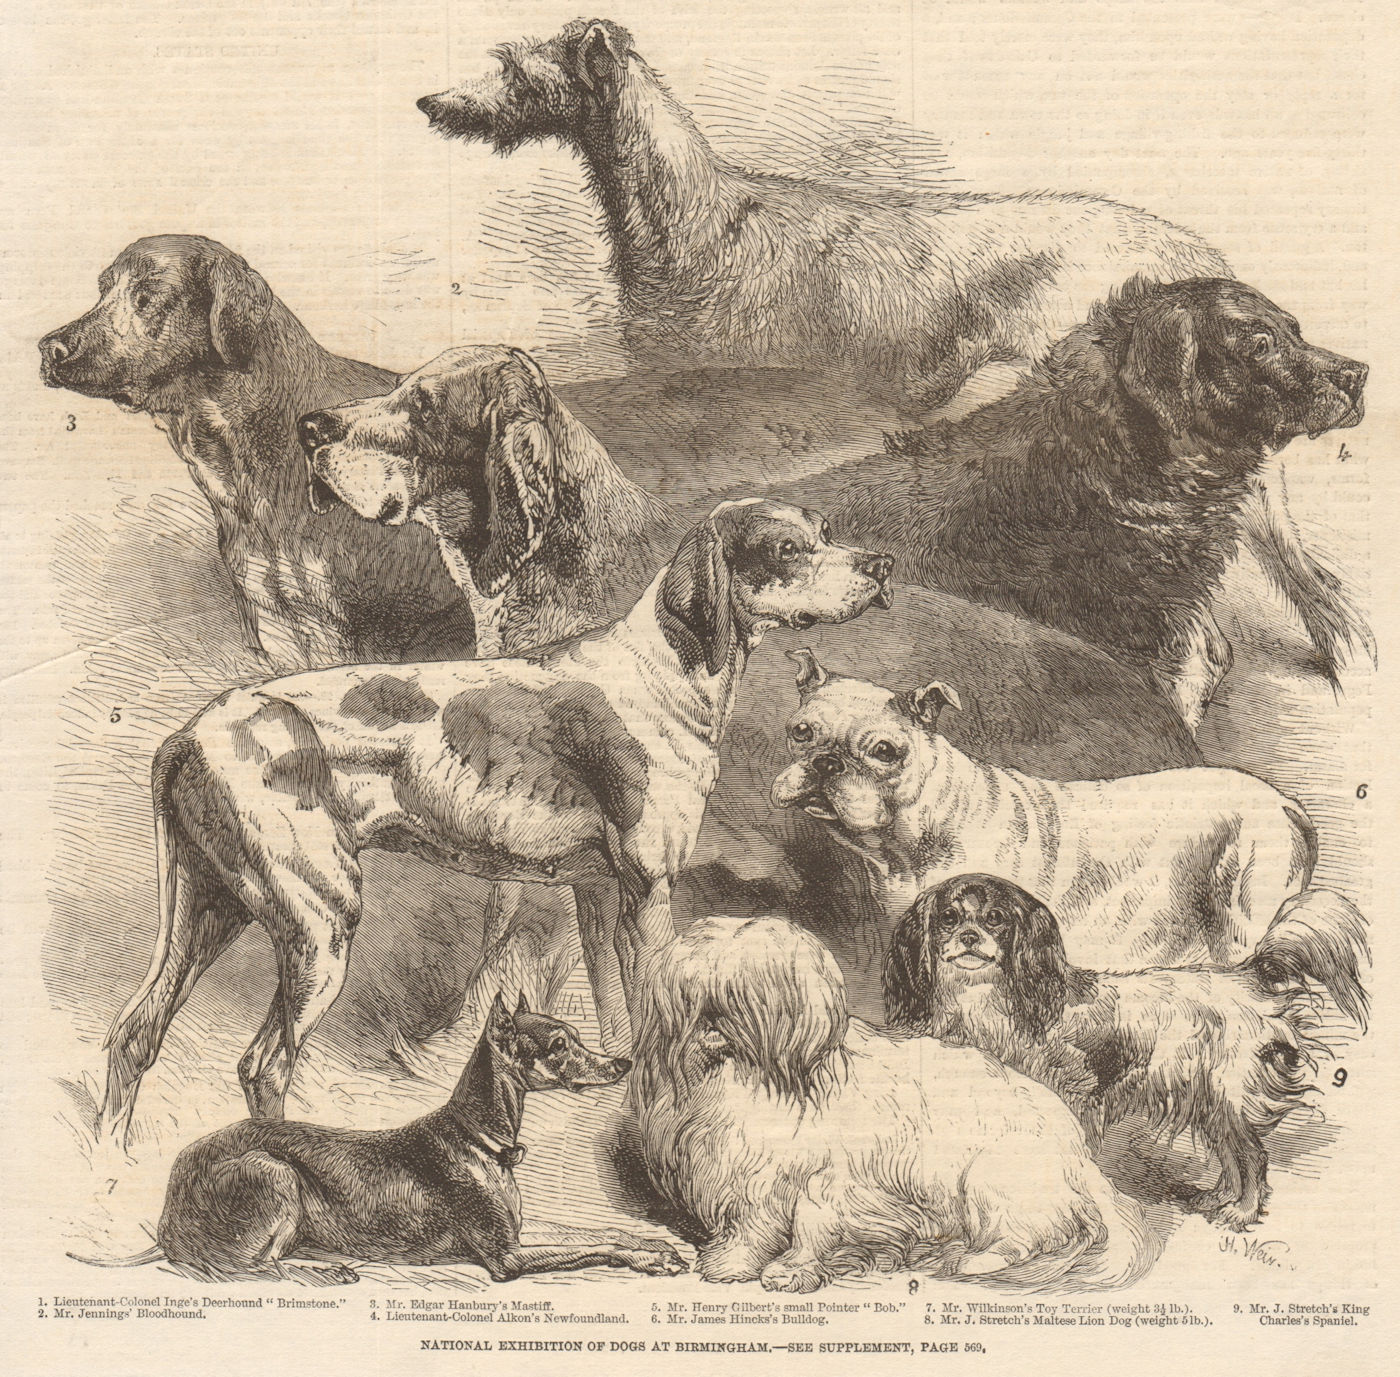 Associate Product National exhibition of dogs at Birmingham. Warwickshire 1860 antique ILN page